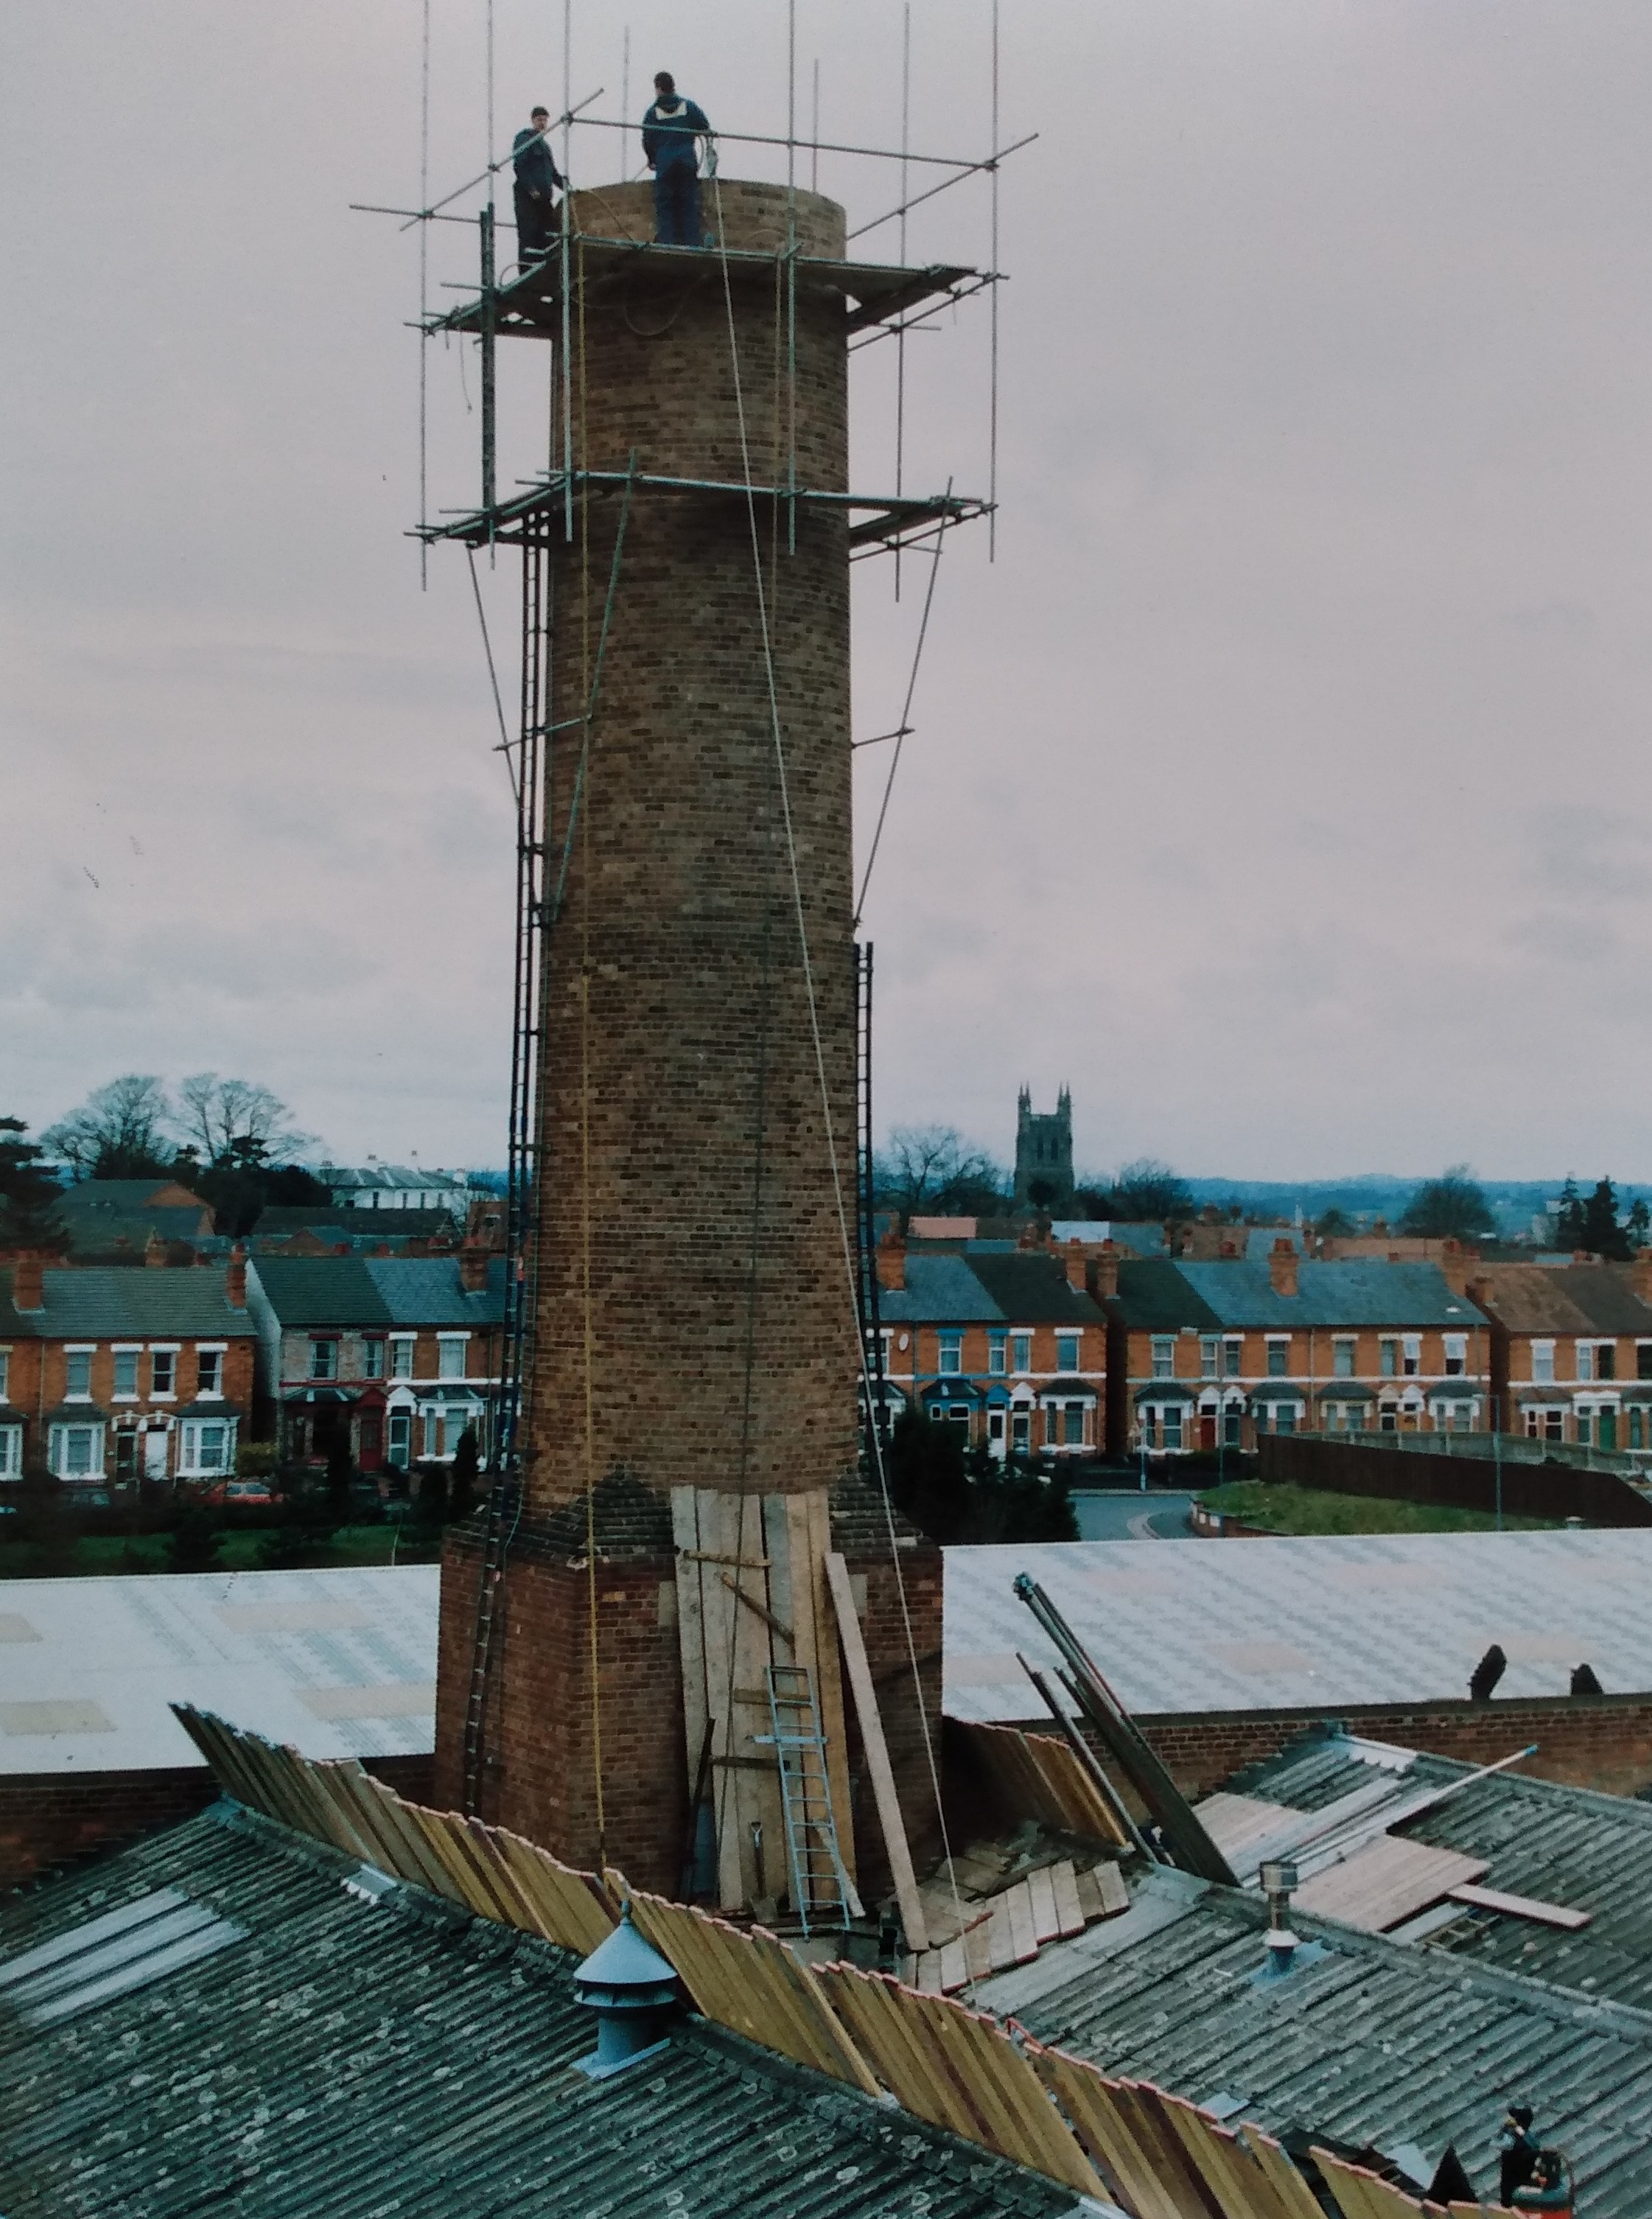 The 135ft chinmey at CarnaudMetalbox towered over the Perry Wood area of Worcester for more than 30 years